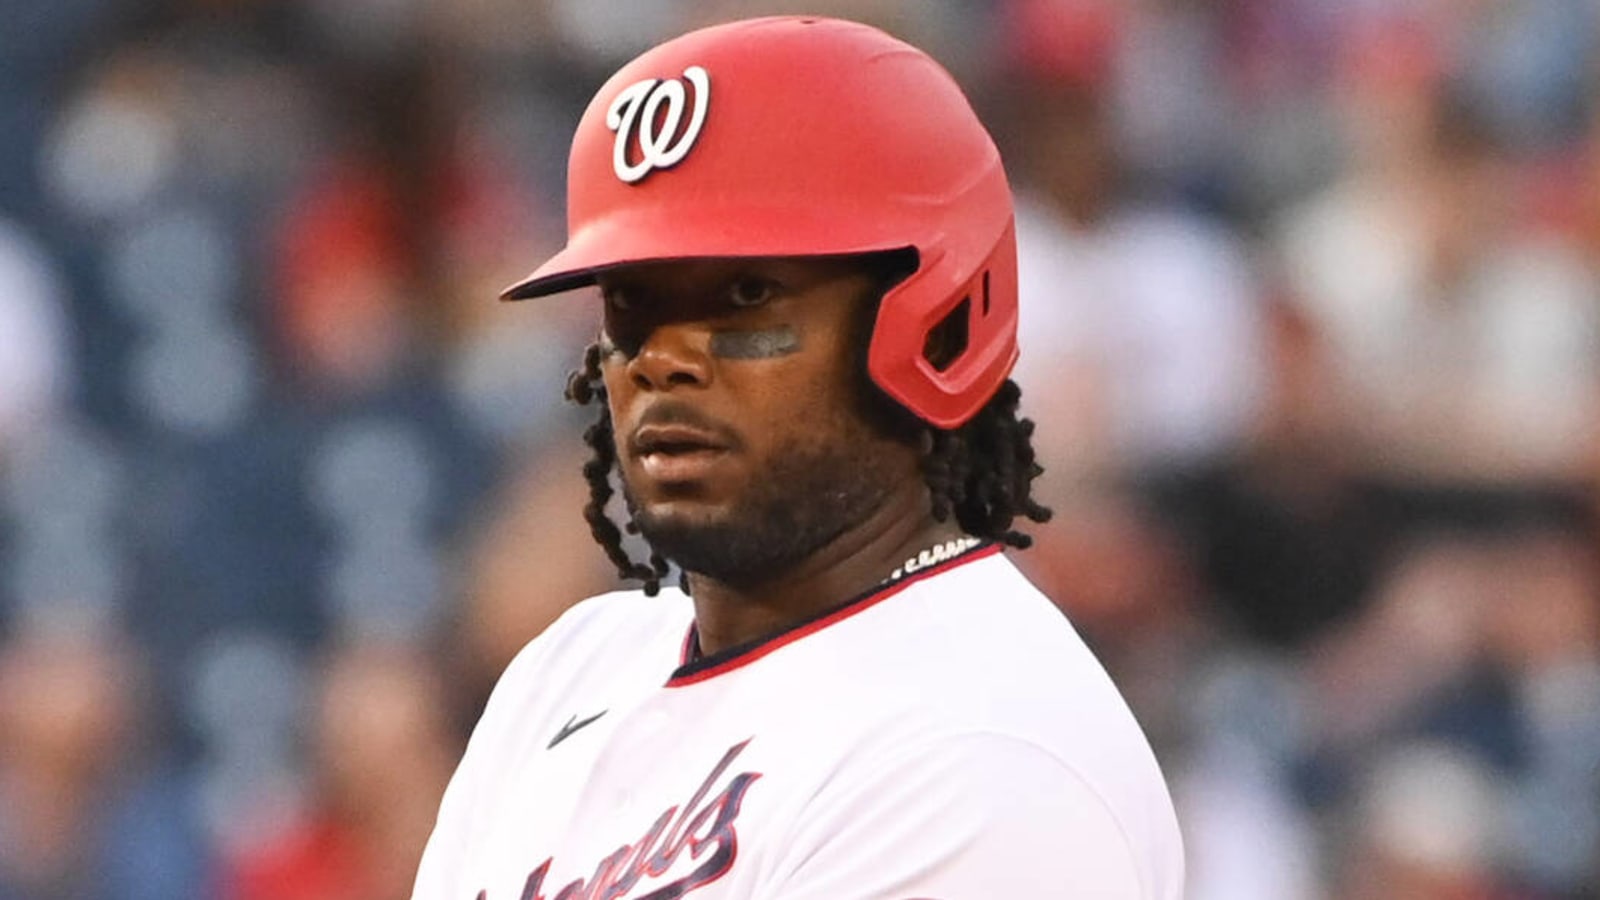 Nationals 1B Josh Bell out with hamstring tightness